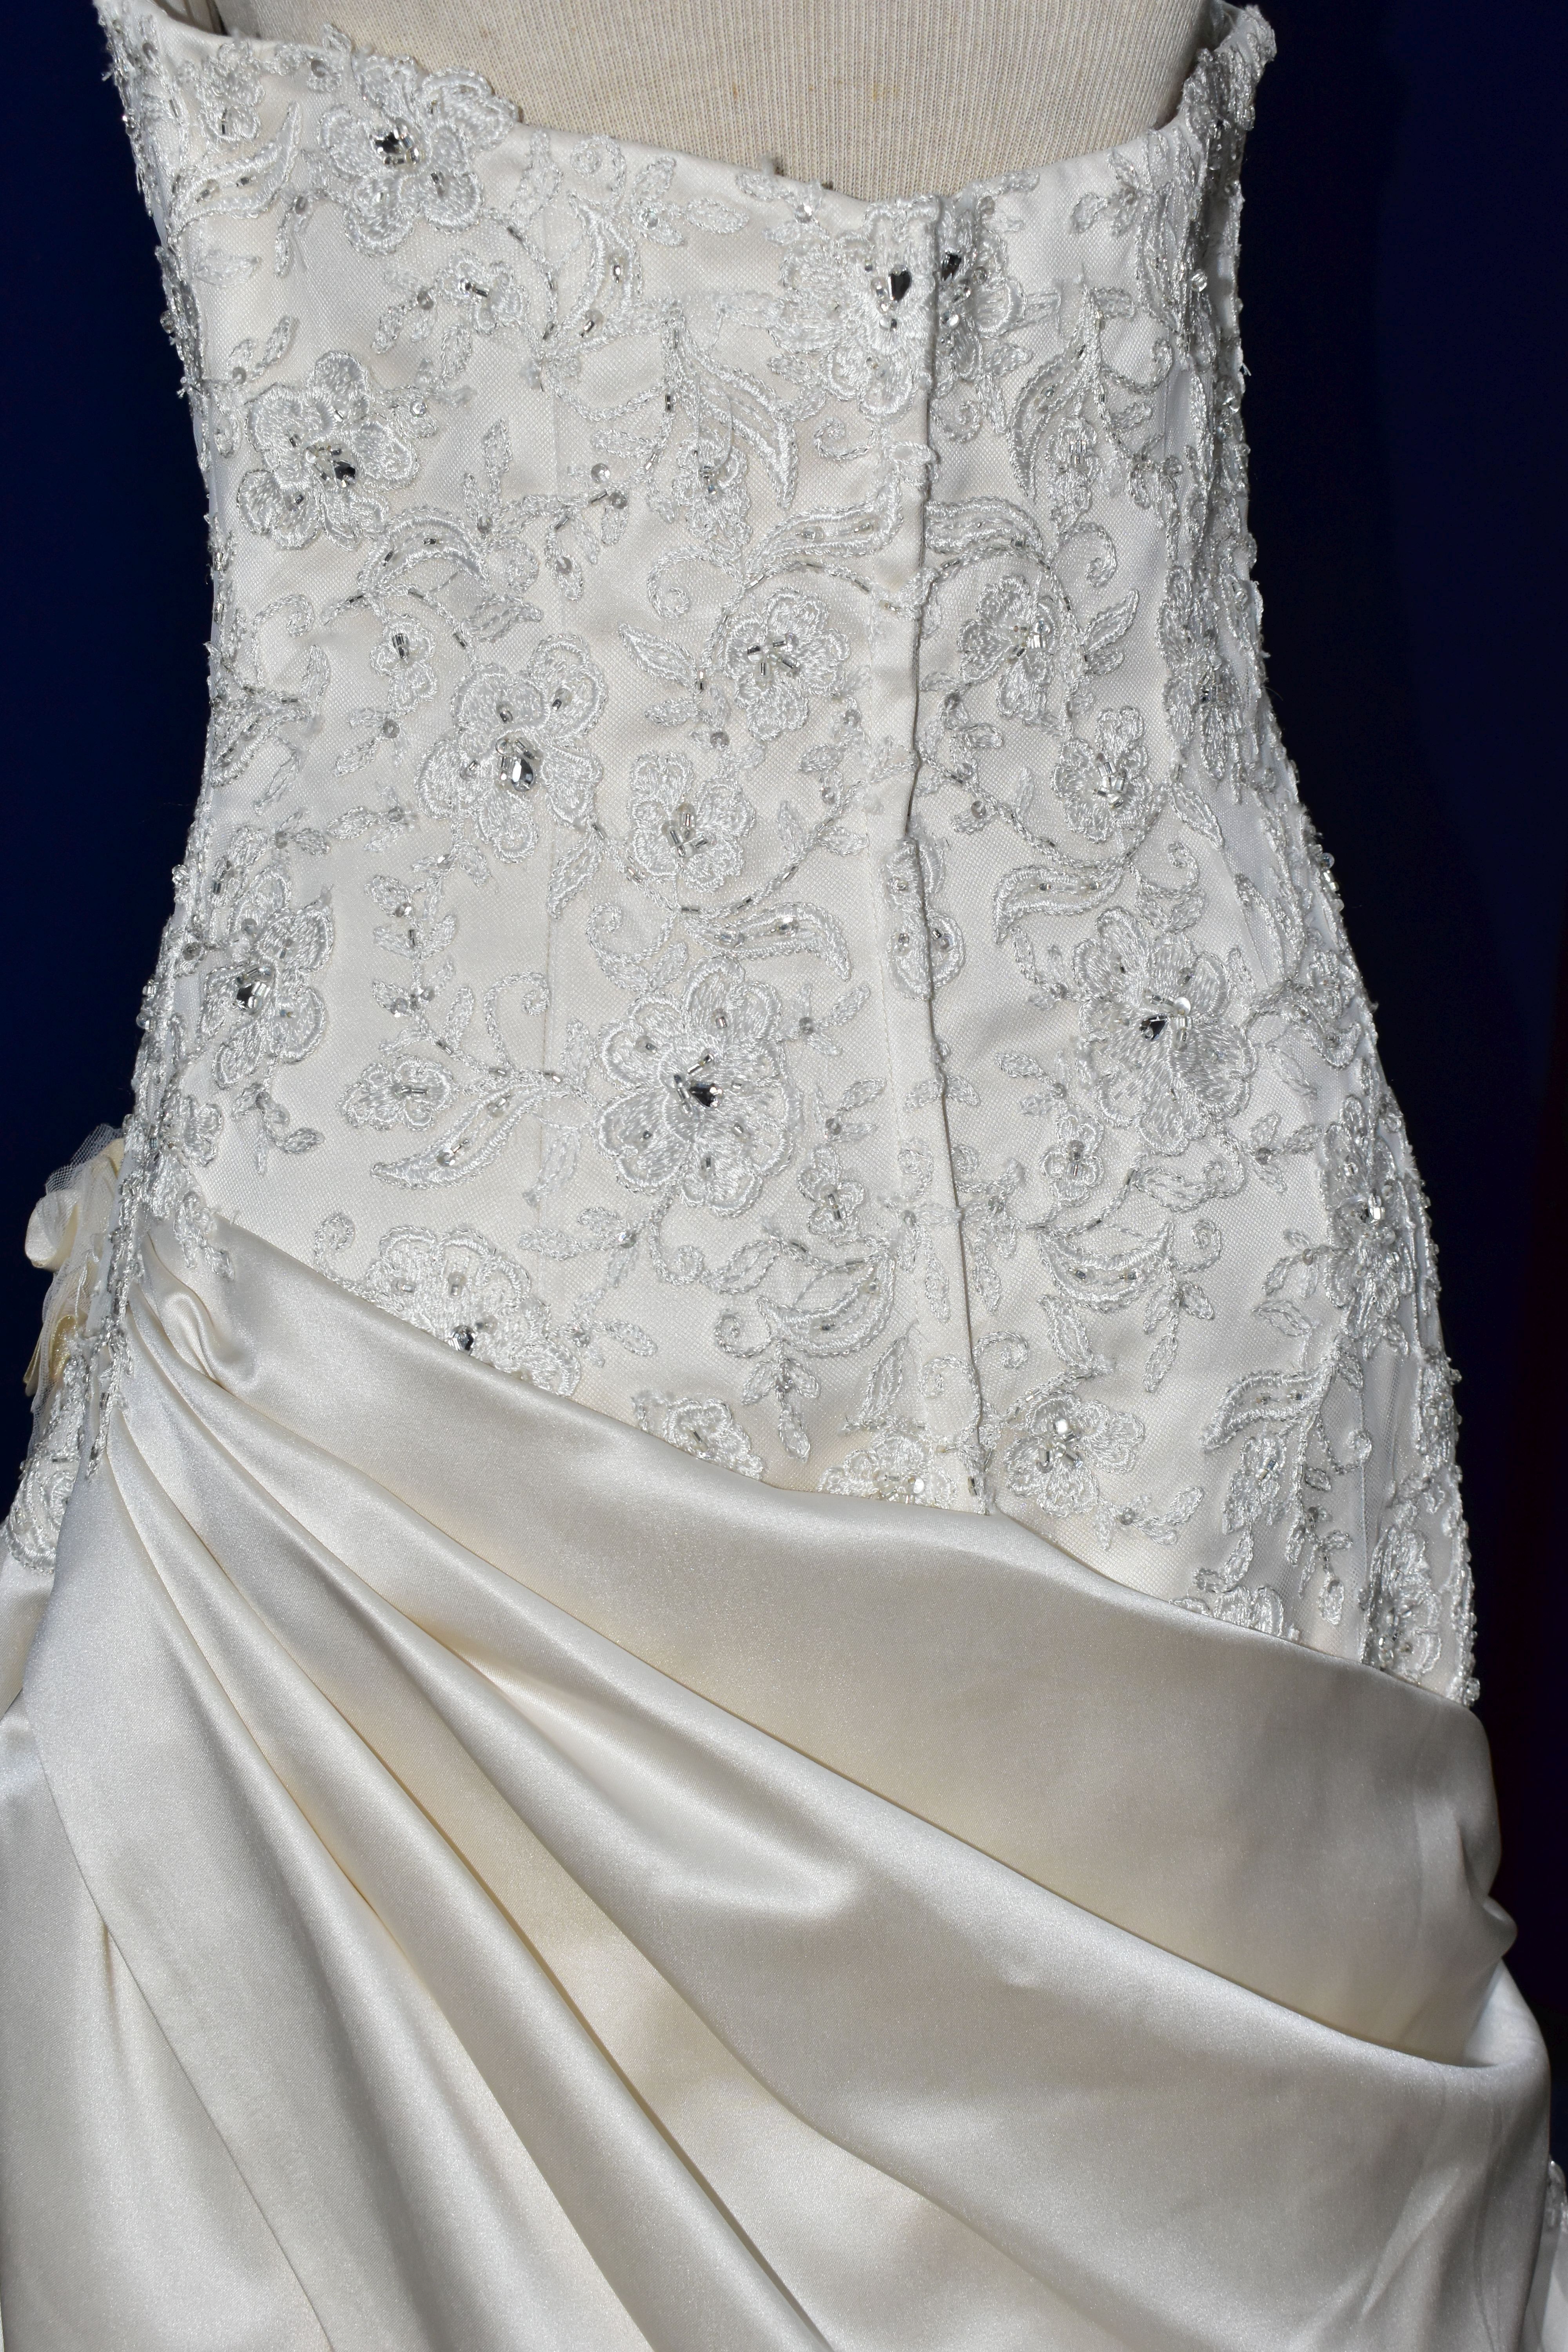 WEDDING GOWN, champagne, size 10/12, satin with beaded appliques, gathered satin skirt (1) - Image 13 of 13